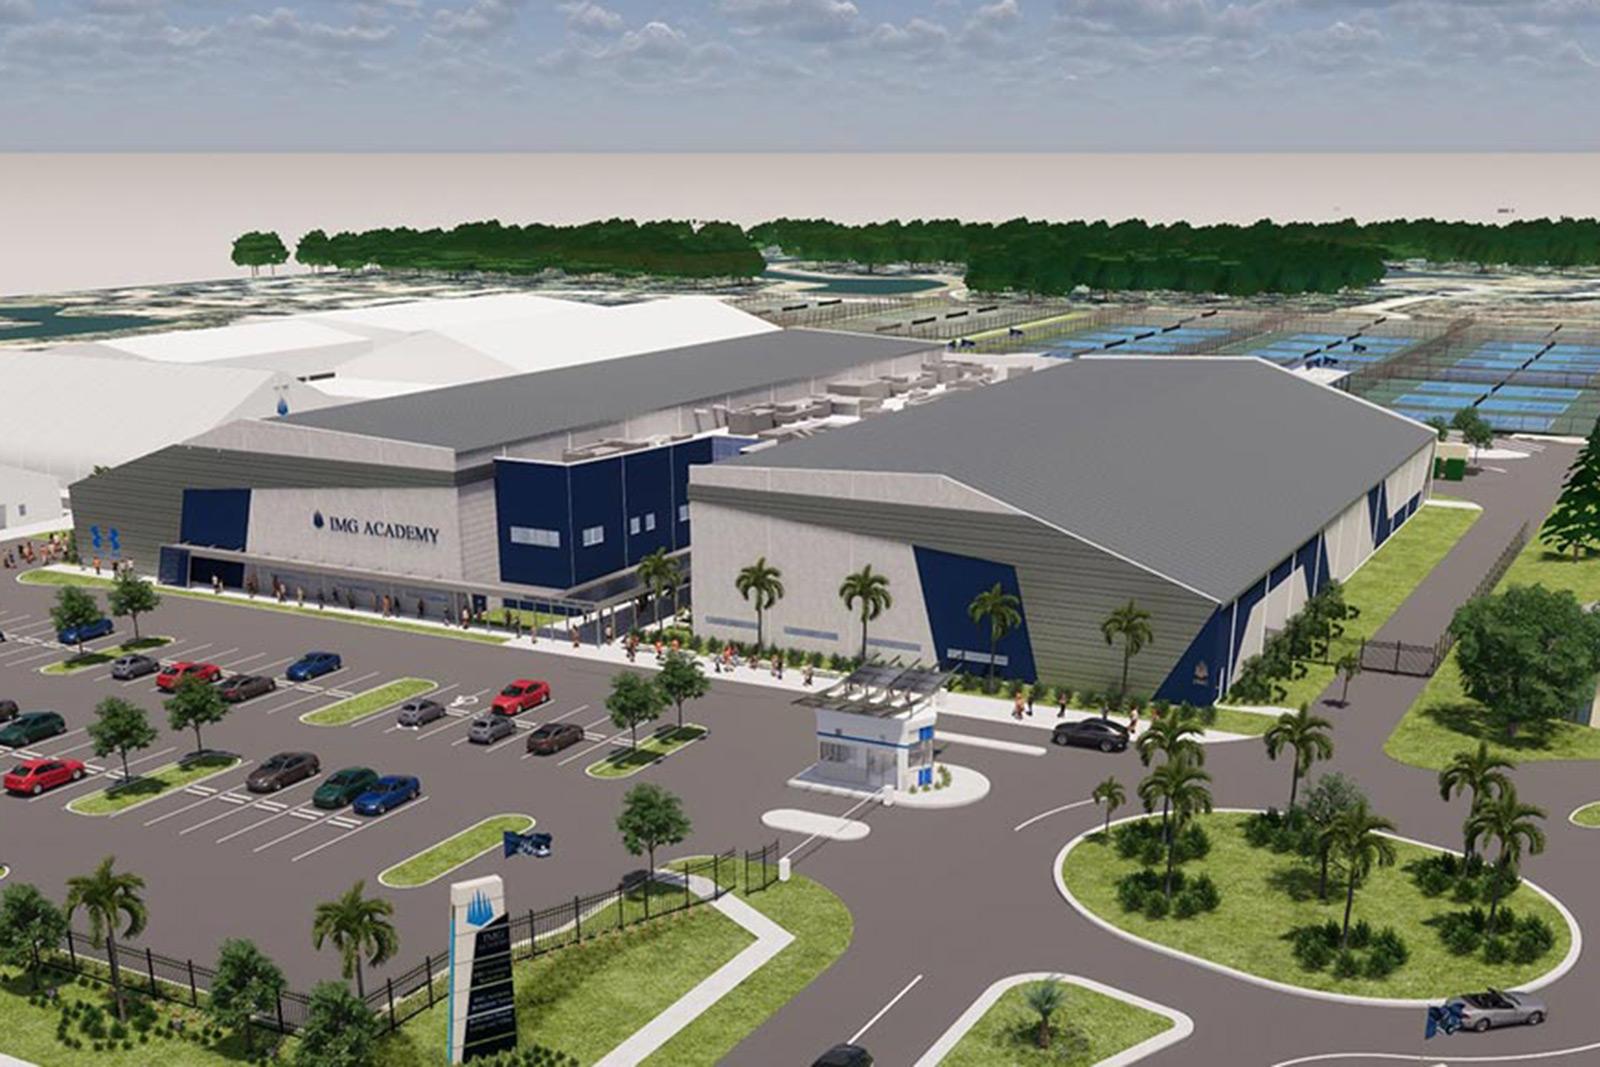 img academy campus expansion